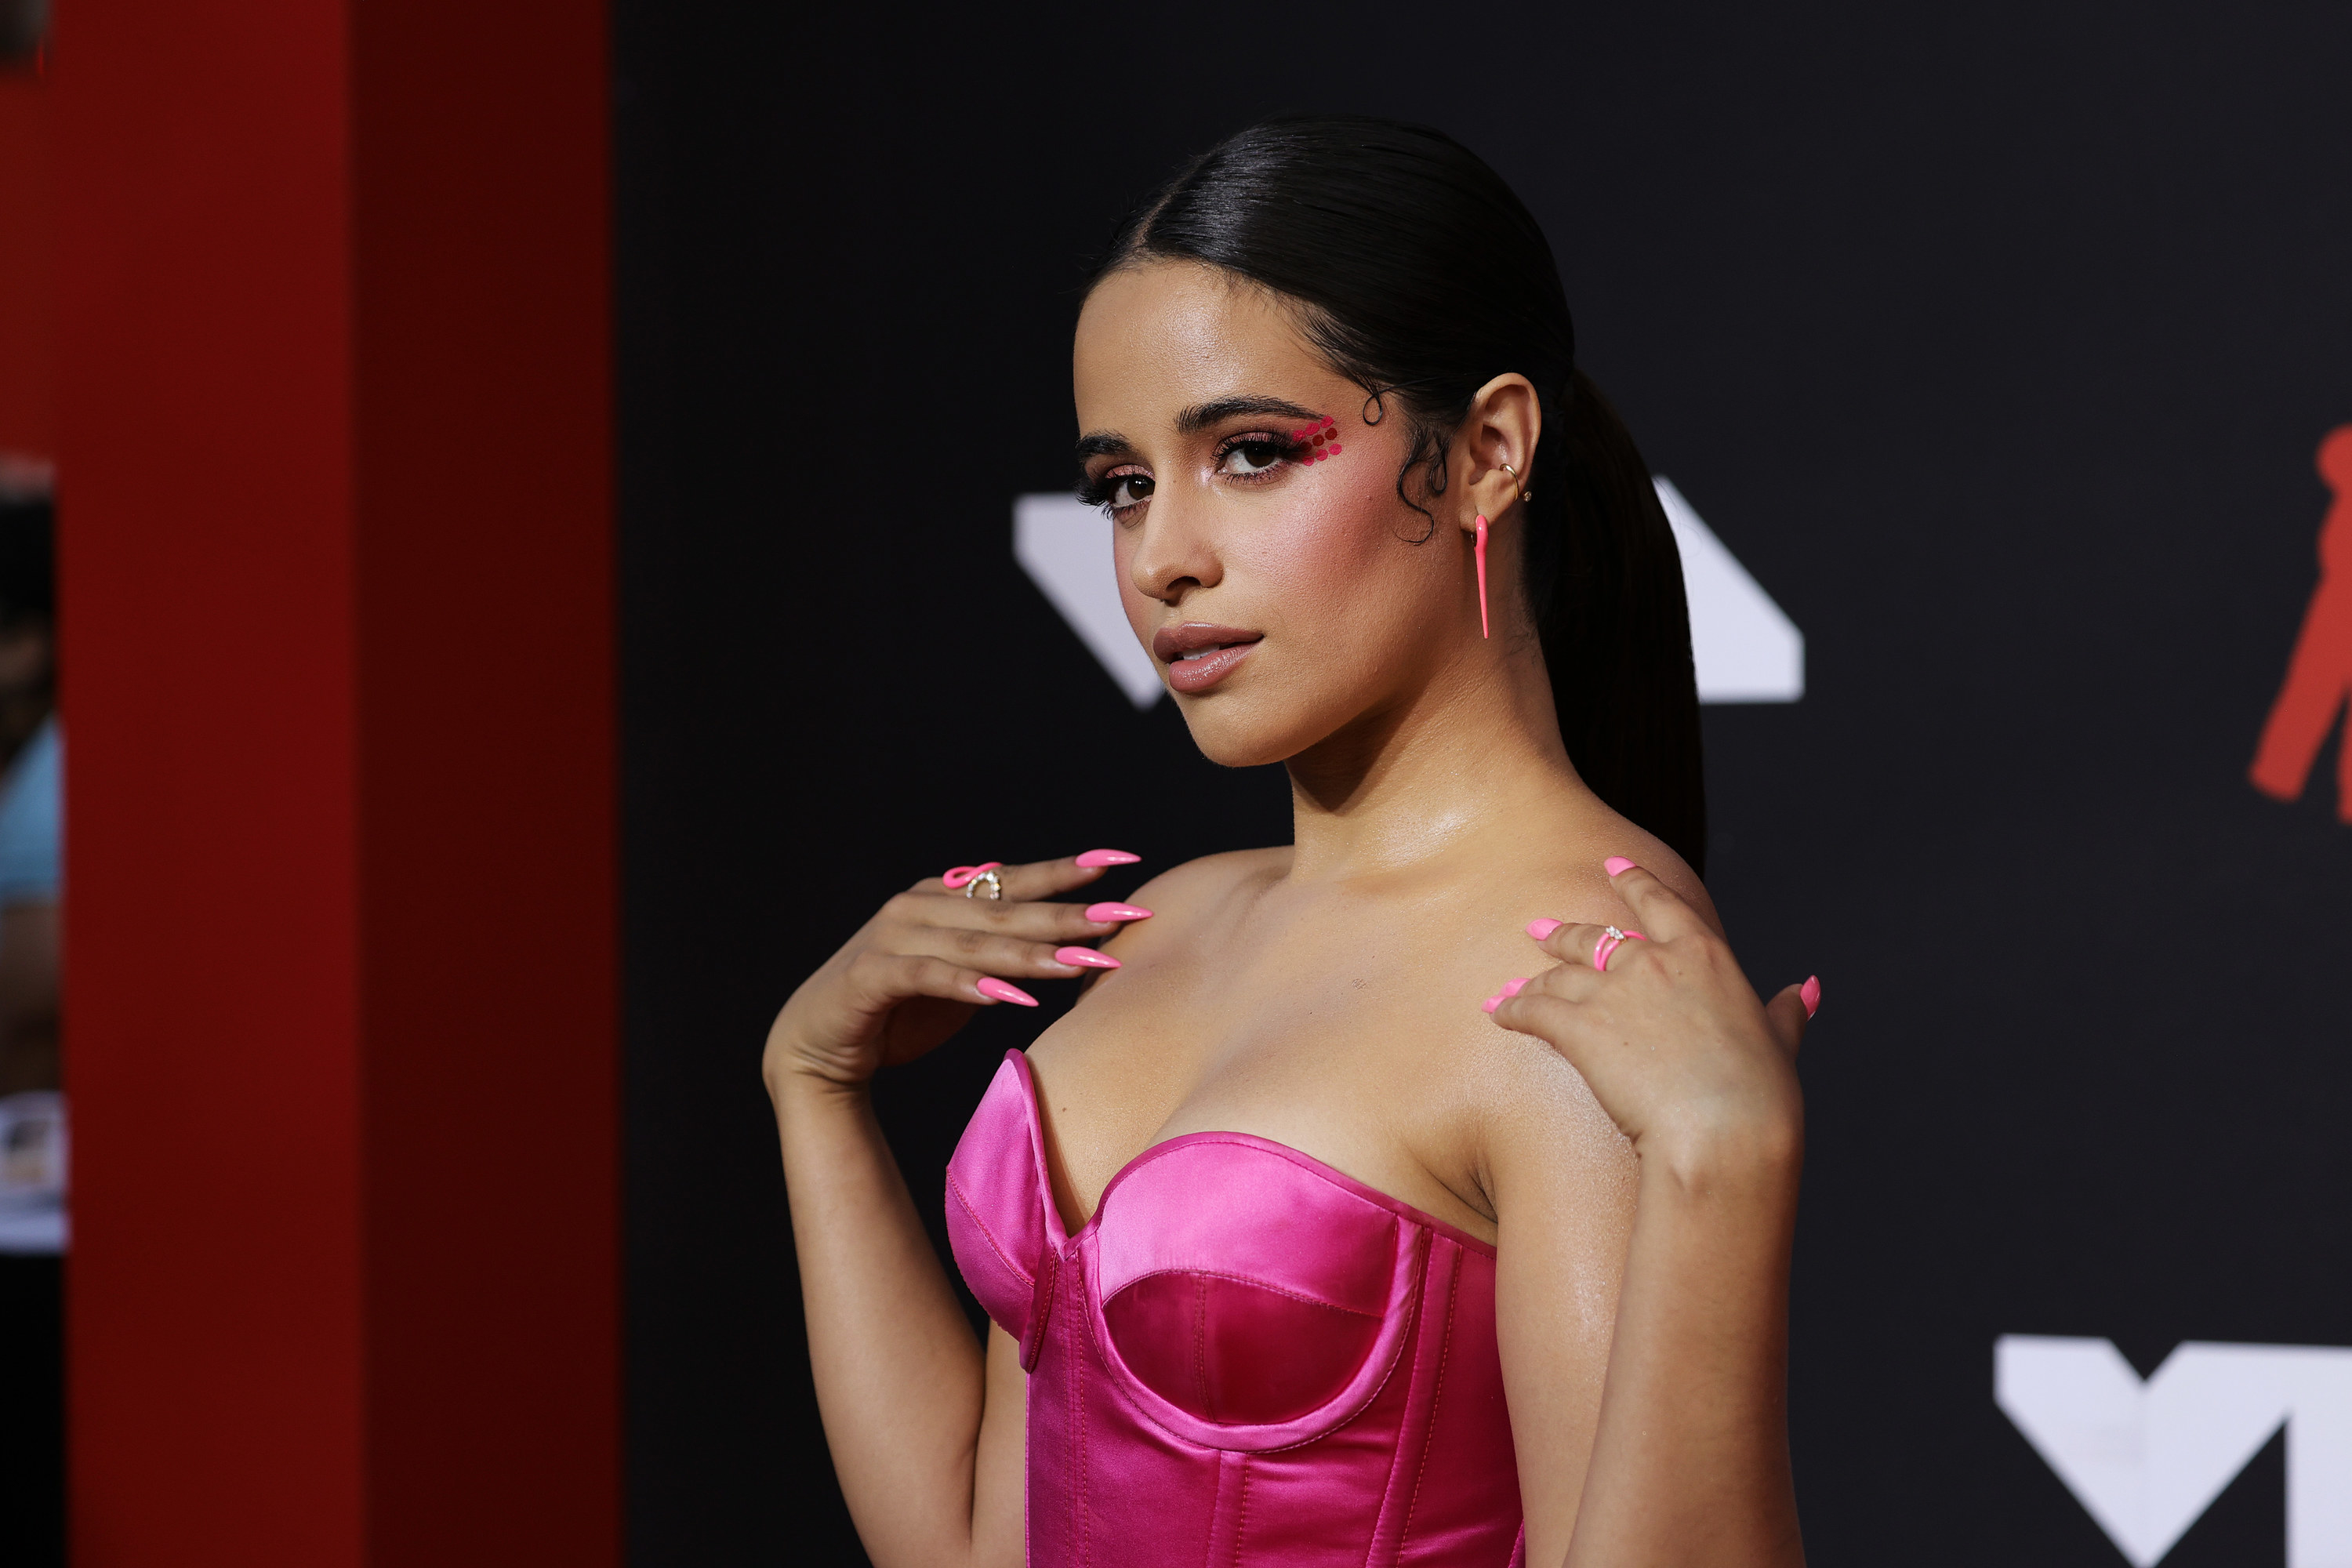 Camila Cabello Had A Wardrobe Malfunction On TV And People Are